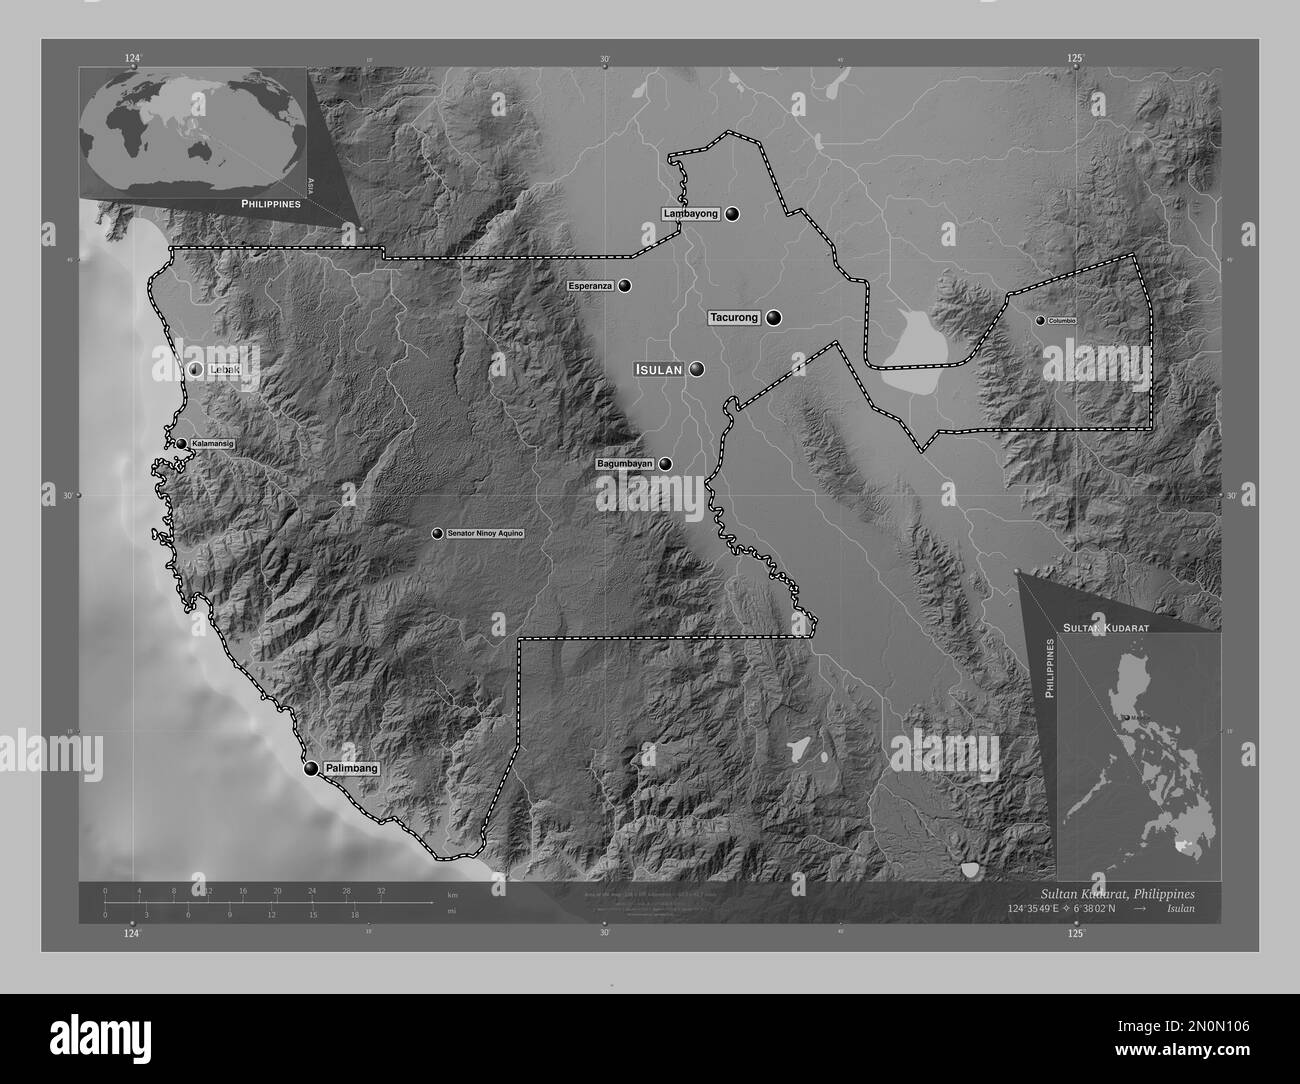 Sultan Kudarat, province of Philippines. Grayscale elevation map with lakes and rivers. Locations and names of major cities of the region. Corner auxi Stock Photo